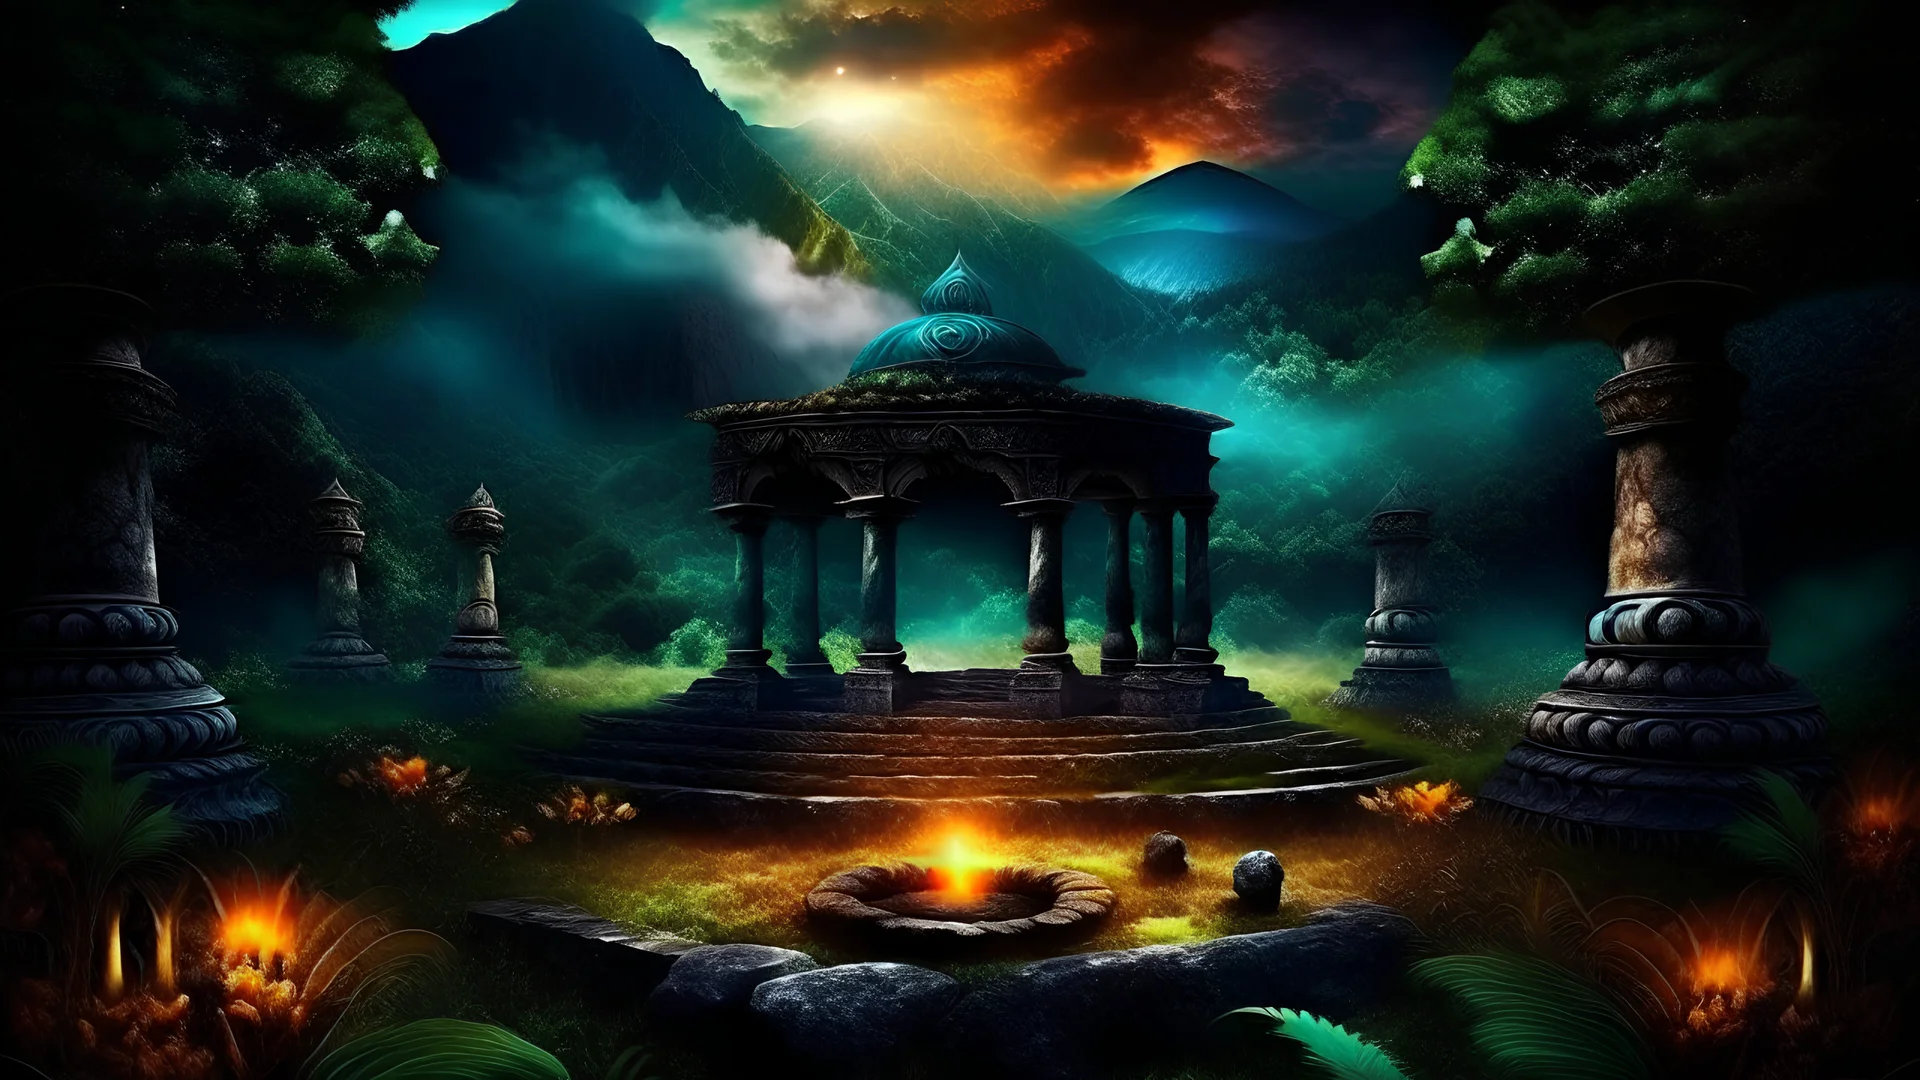 meditation round podium . my dreams . day landscape, In the garden my mind bows . meditation .The ruins of a village in the midst in the jungle , mountains. space color is dark , where you can see the fire and smell the smoke, galaxy, space, ethereal space, cosmos, panorama. Palace , Background: An otherworldly planet, bathed in the cold glow of distant stars. Northern Lights dancing above the clouds in papua new guinea.